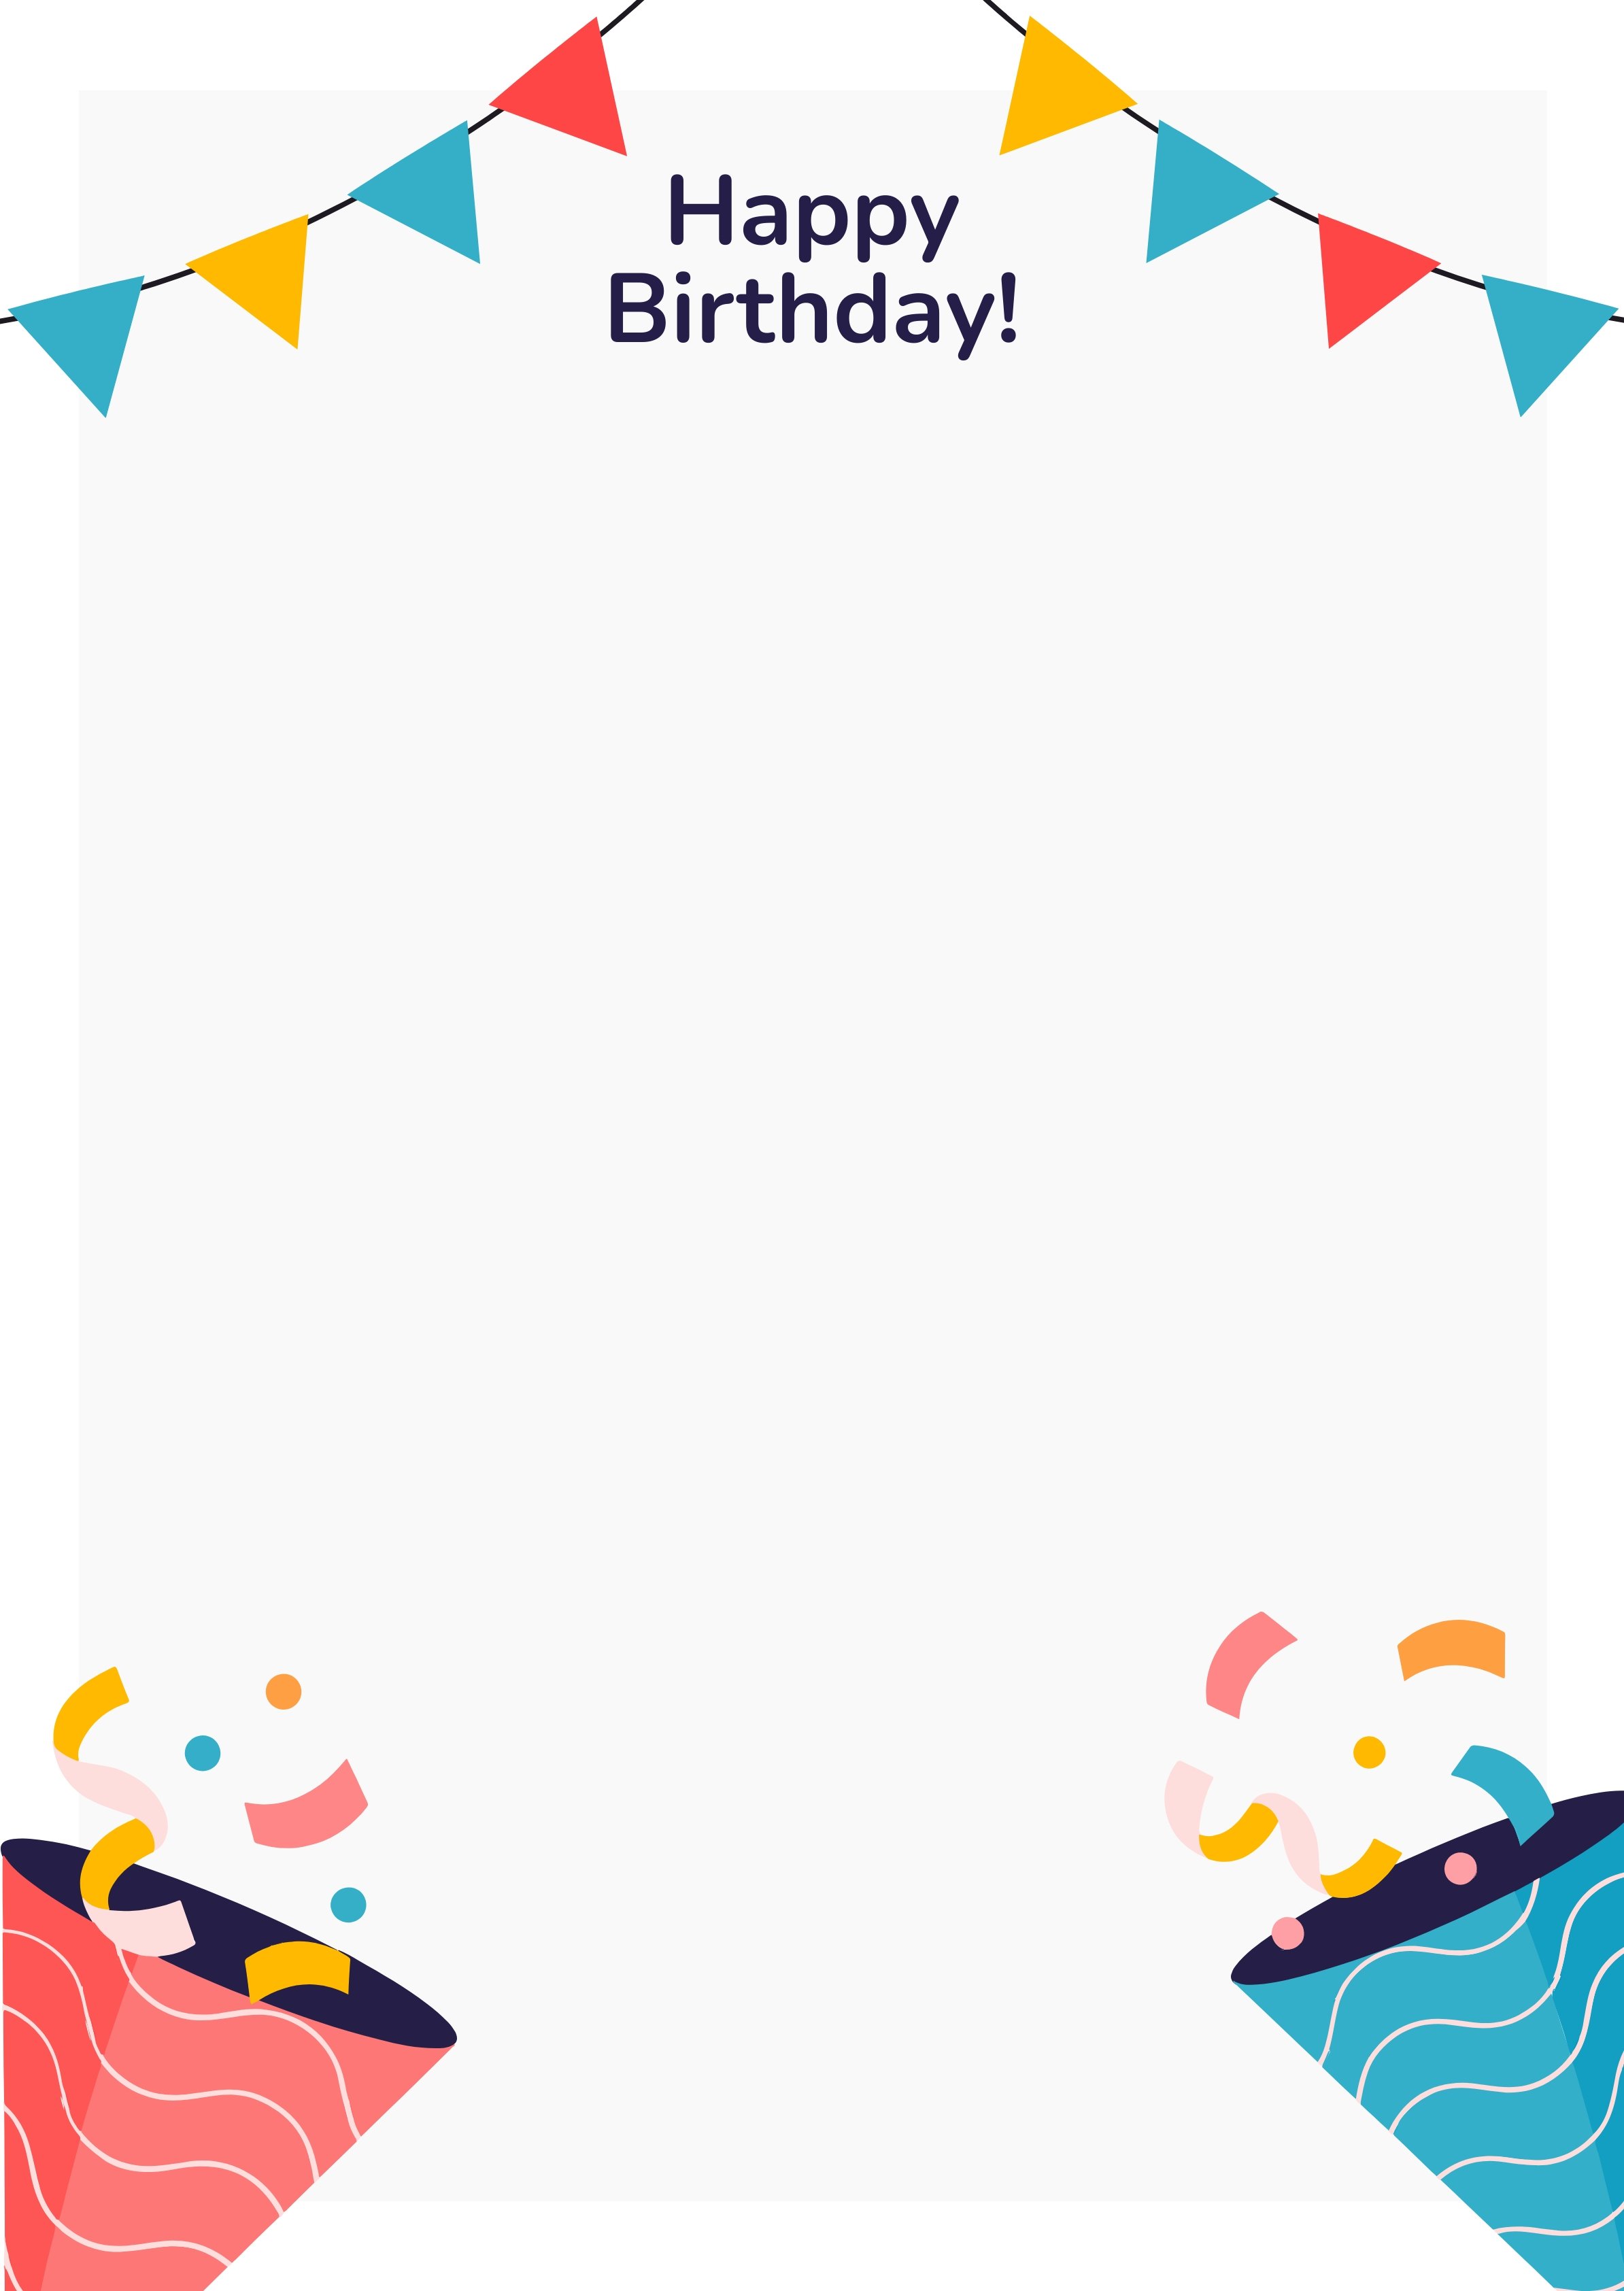 FREE Birthday Border Template - Download in Word, Google Docs ...